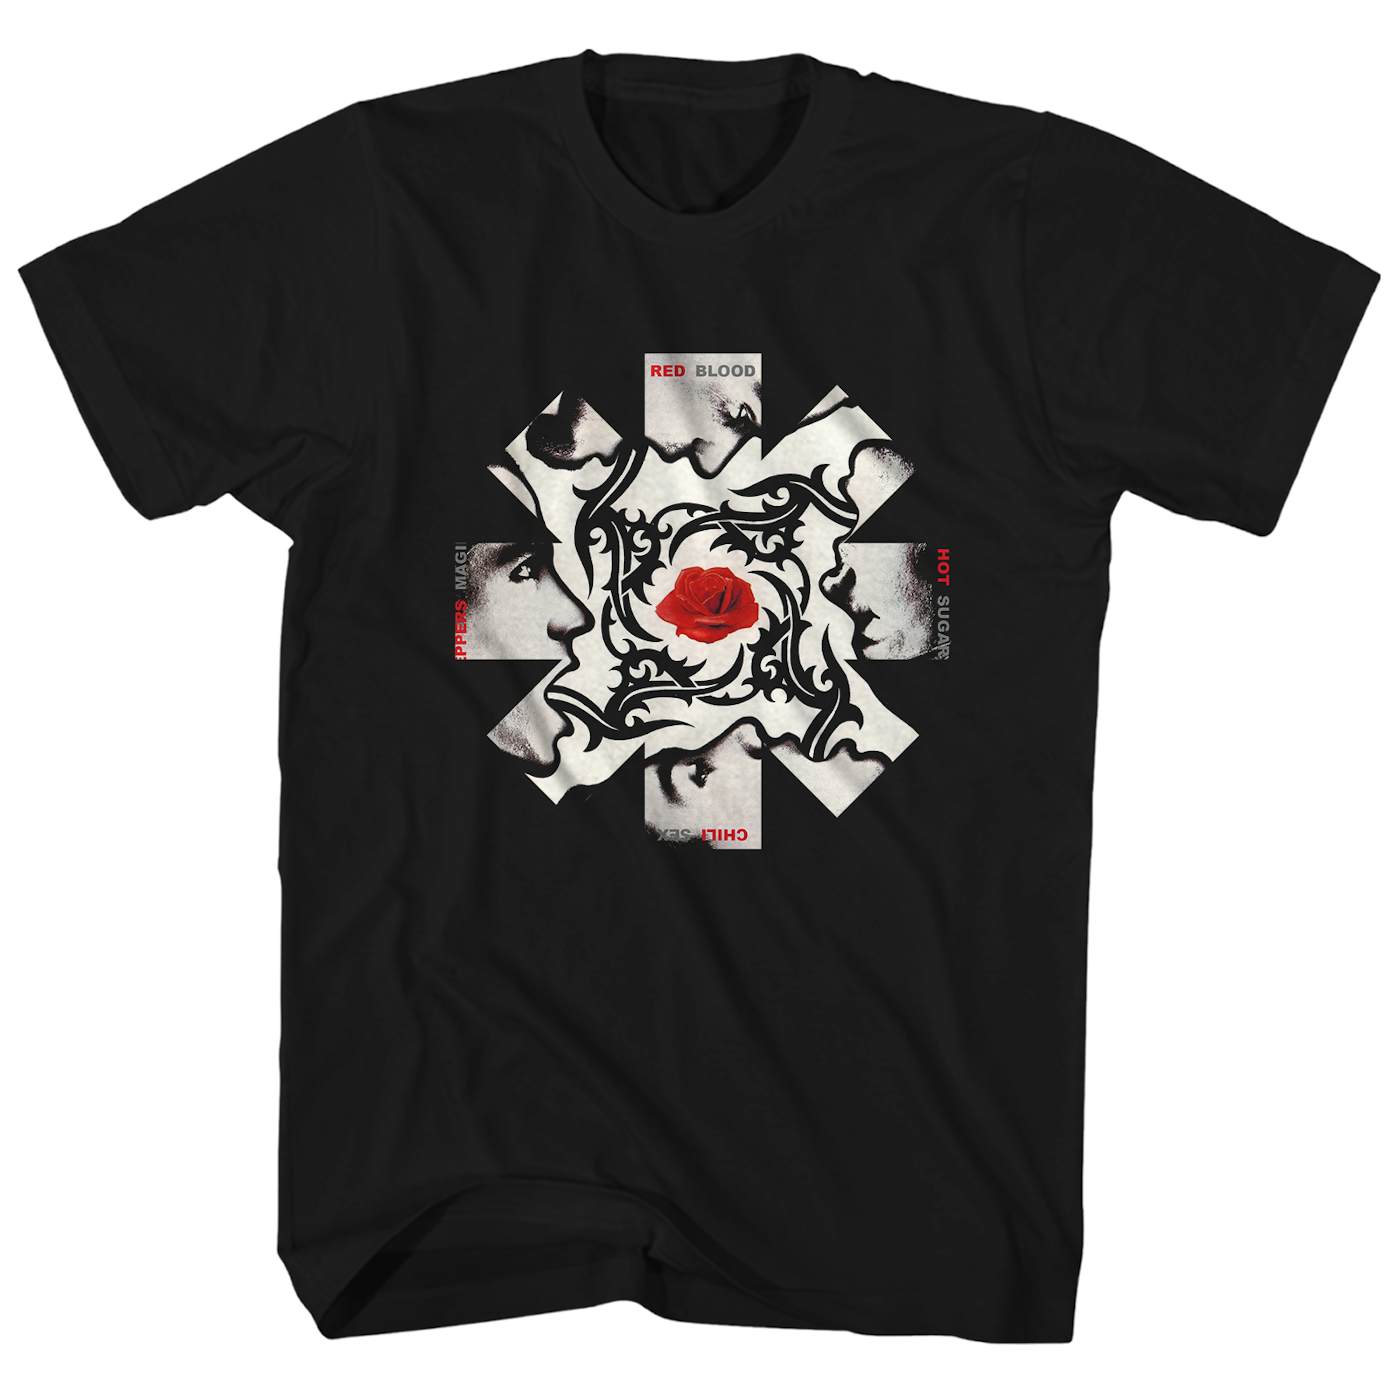 Red Hot Chili Peppers T-Shirt | Blood Sugar Sex Magik Album Art Asterisk Red Hot Chili Peppers Shirt